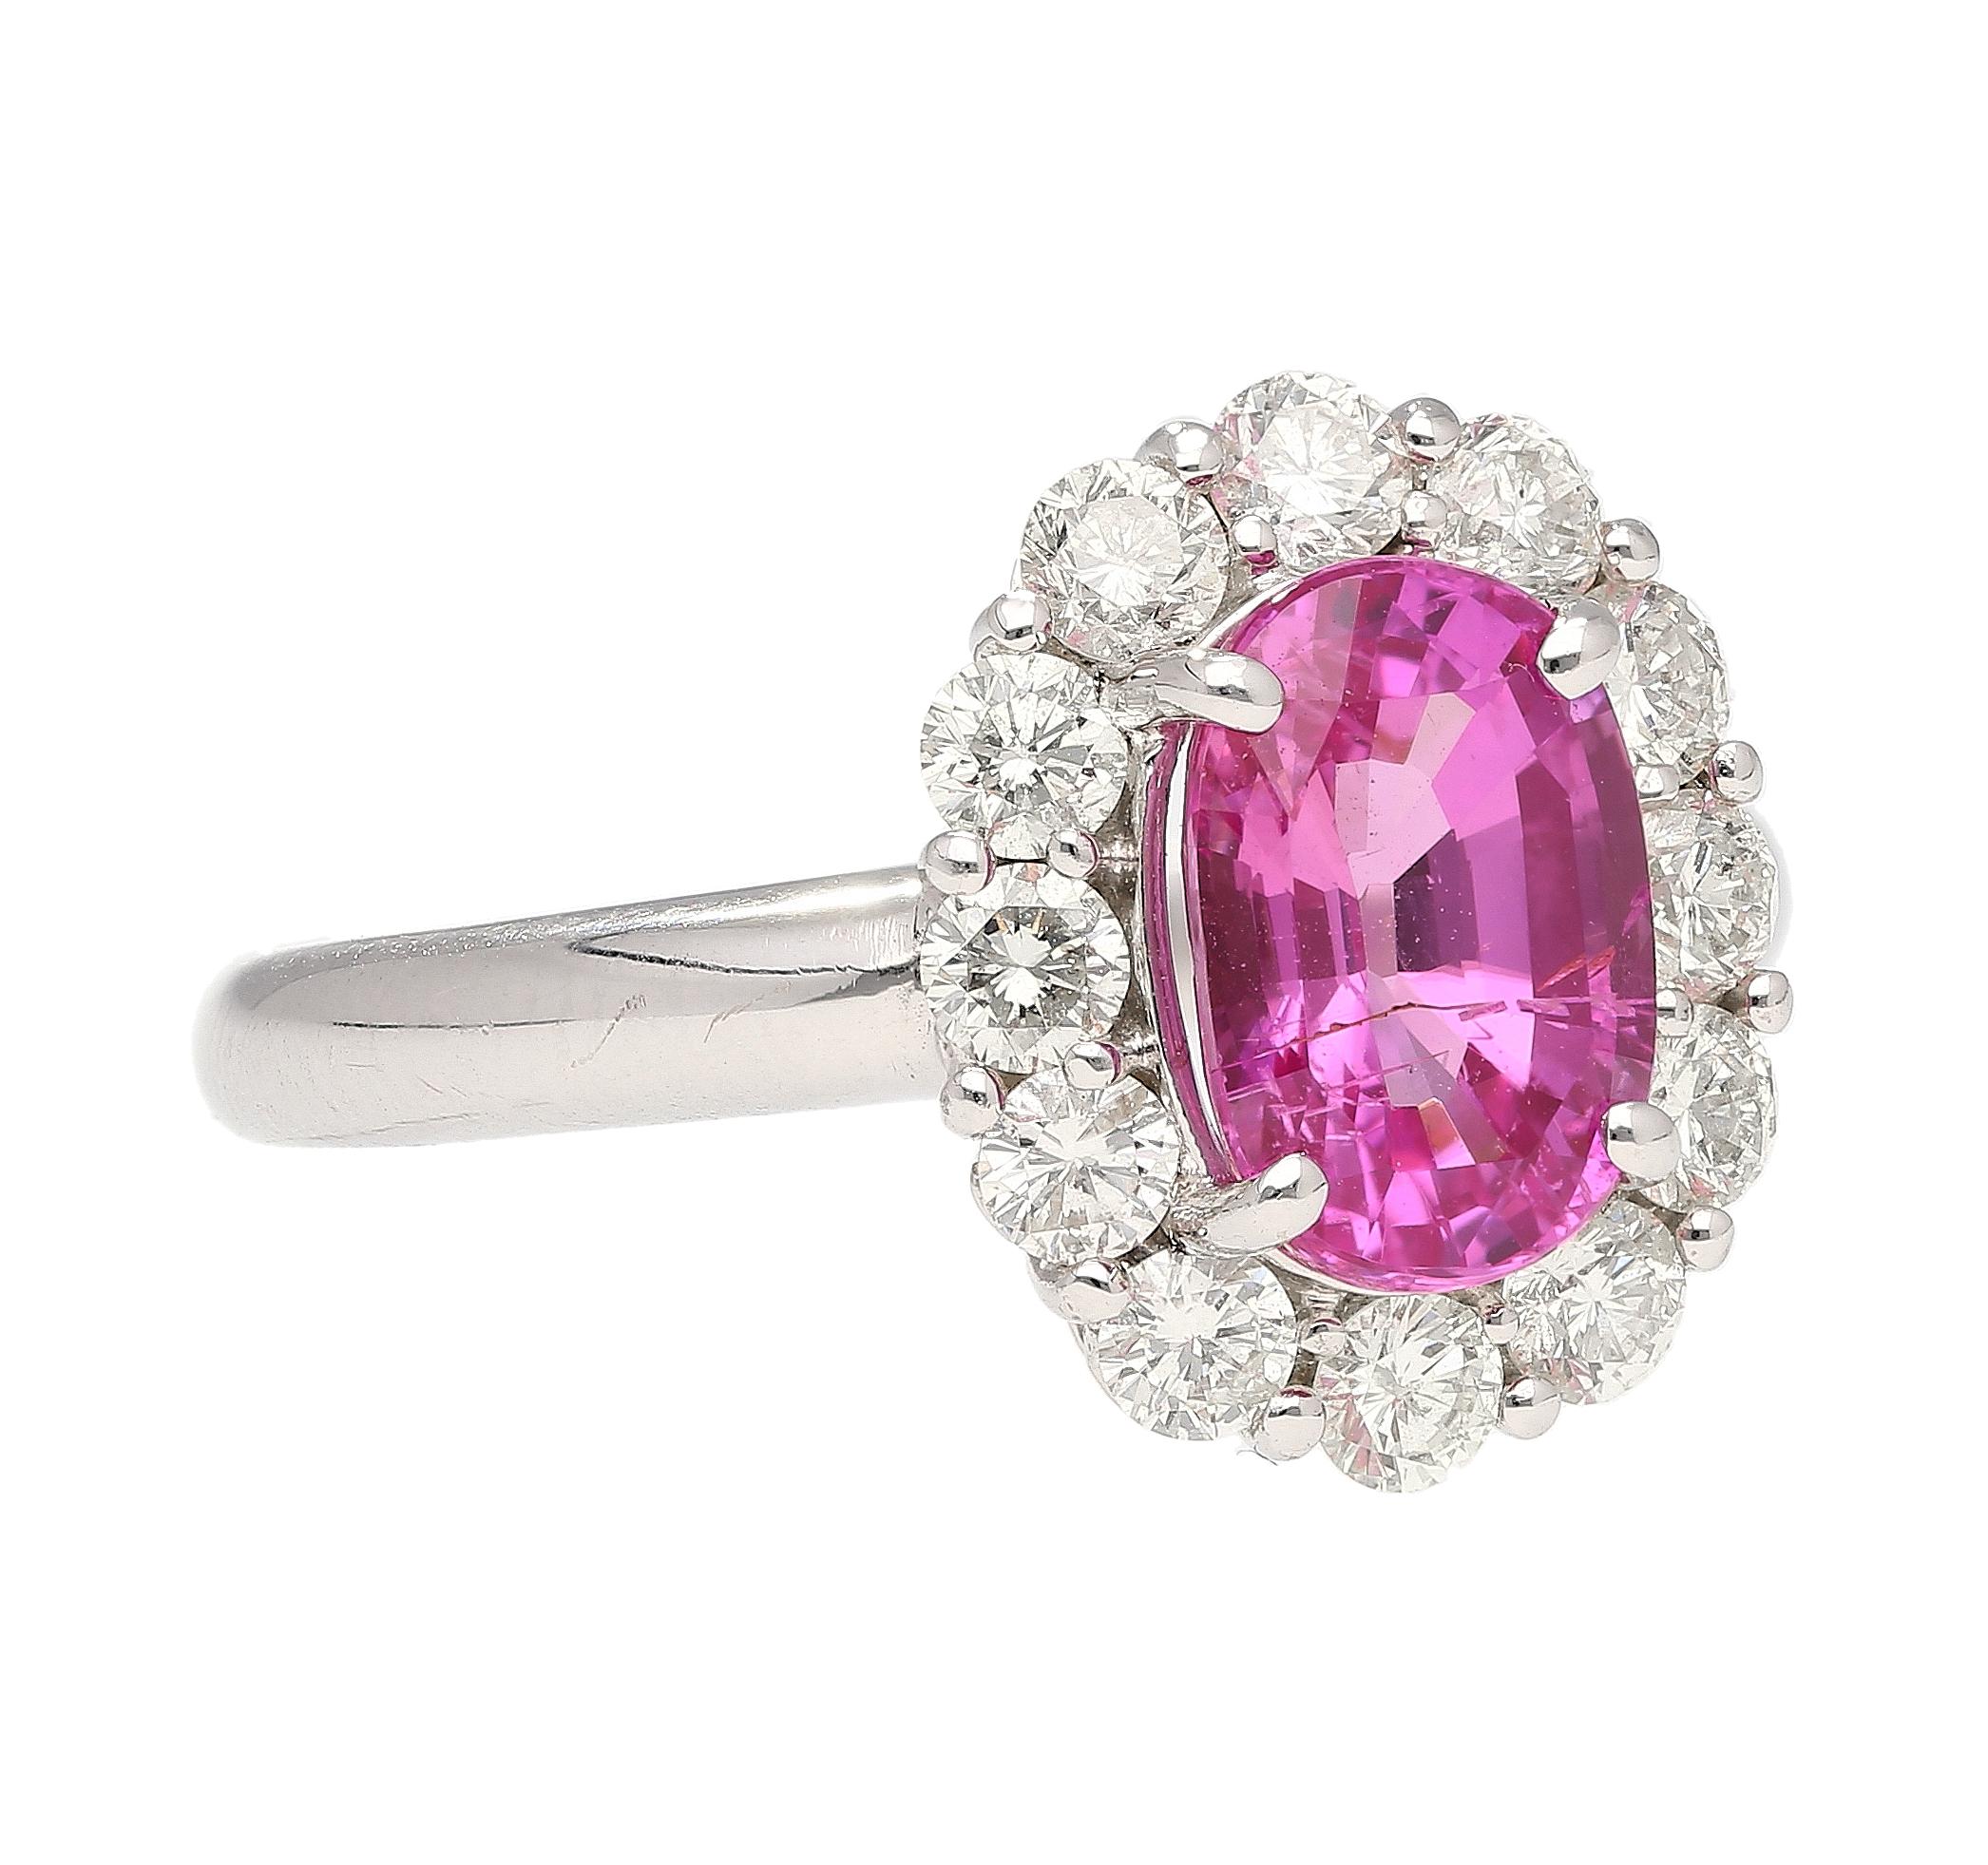 18K White Gold Pink Sapphire Engagement Ring. This exquisite alternative engagement ring is designed to captivate and inspire. Crafted in 18K white gold, this ring showcases a stunning 2.97 carat oval-cut pink sapphire at its center. The pink